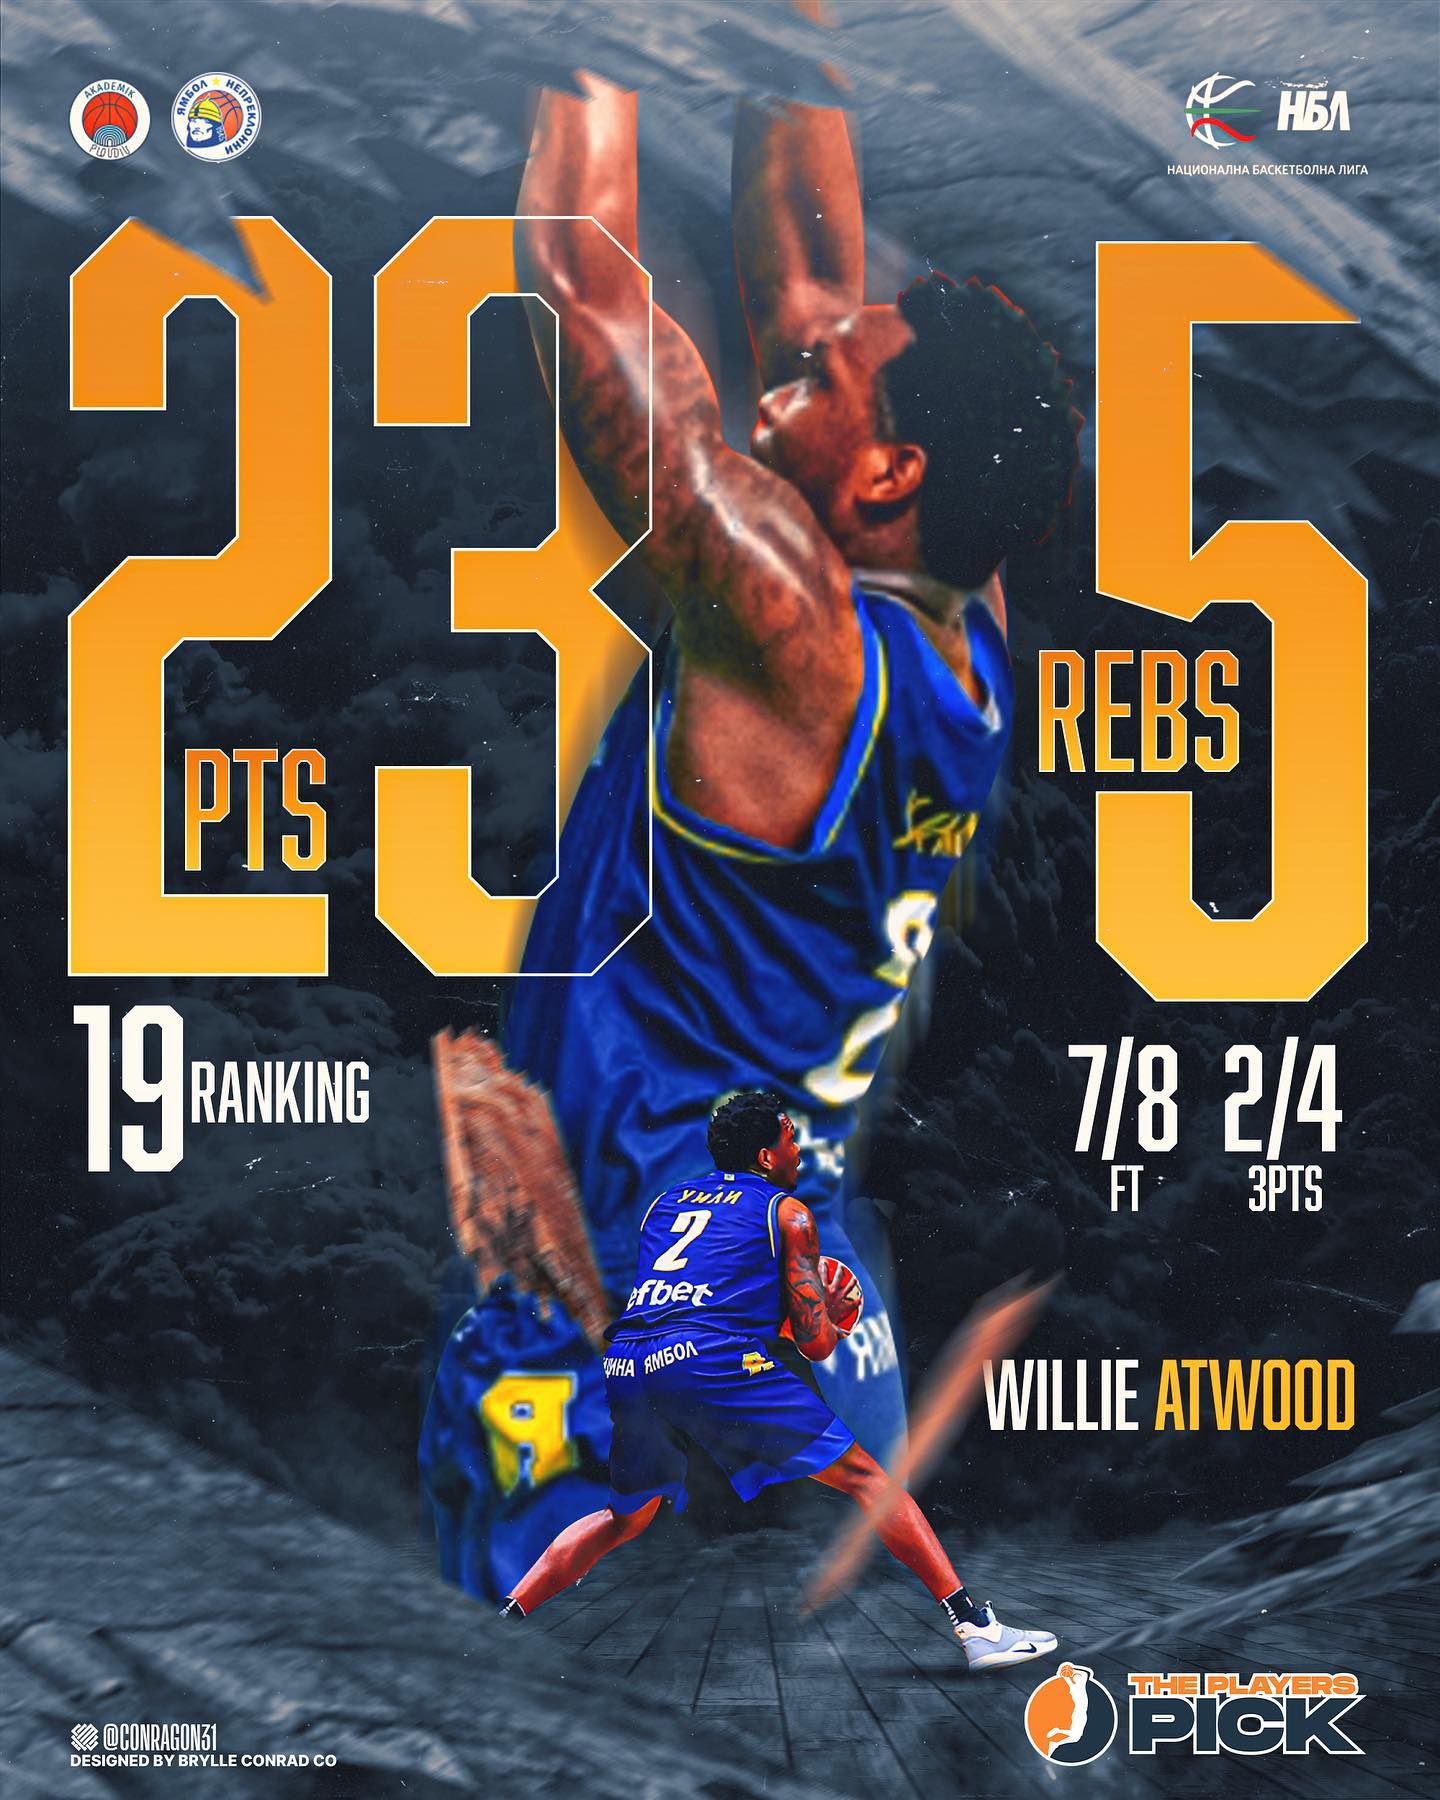 23 points & 19 ranking for Willie Atwood vs Plovdiv in NBL!